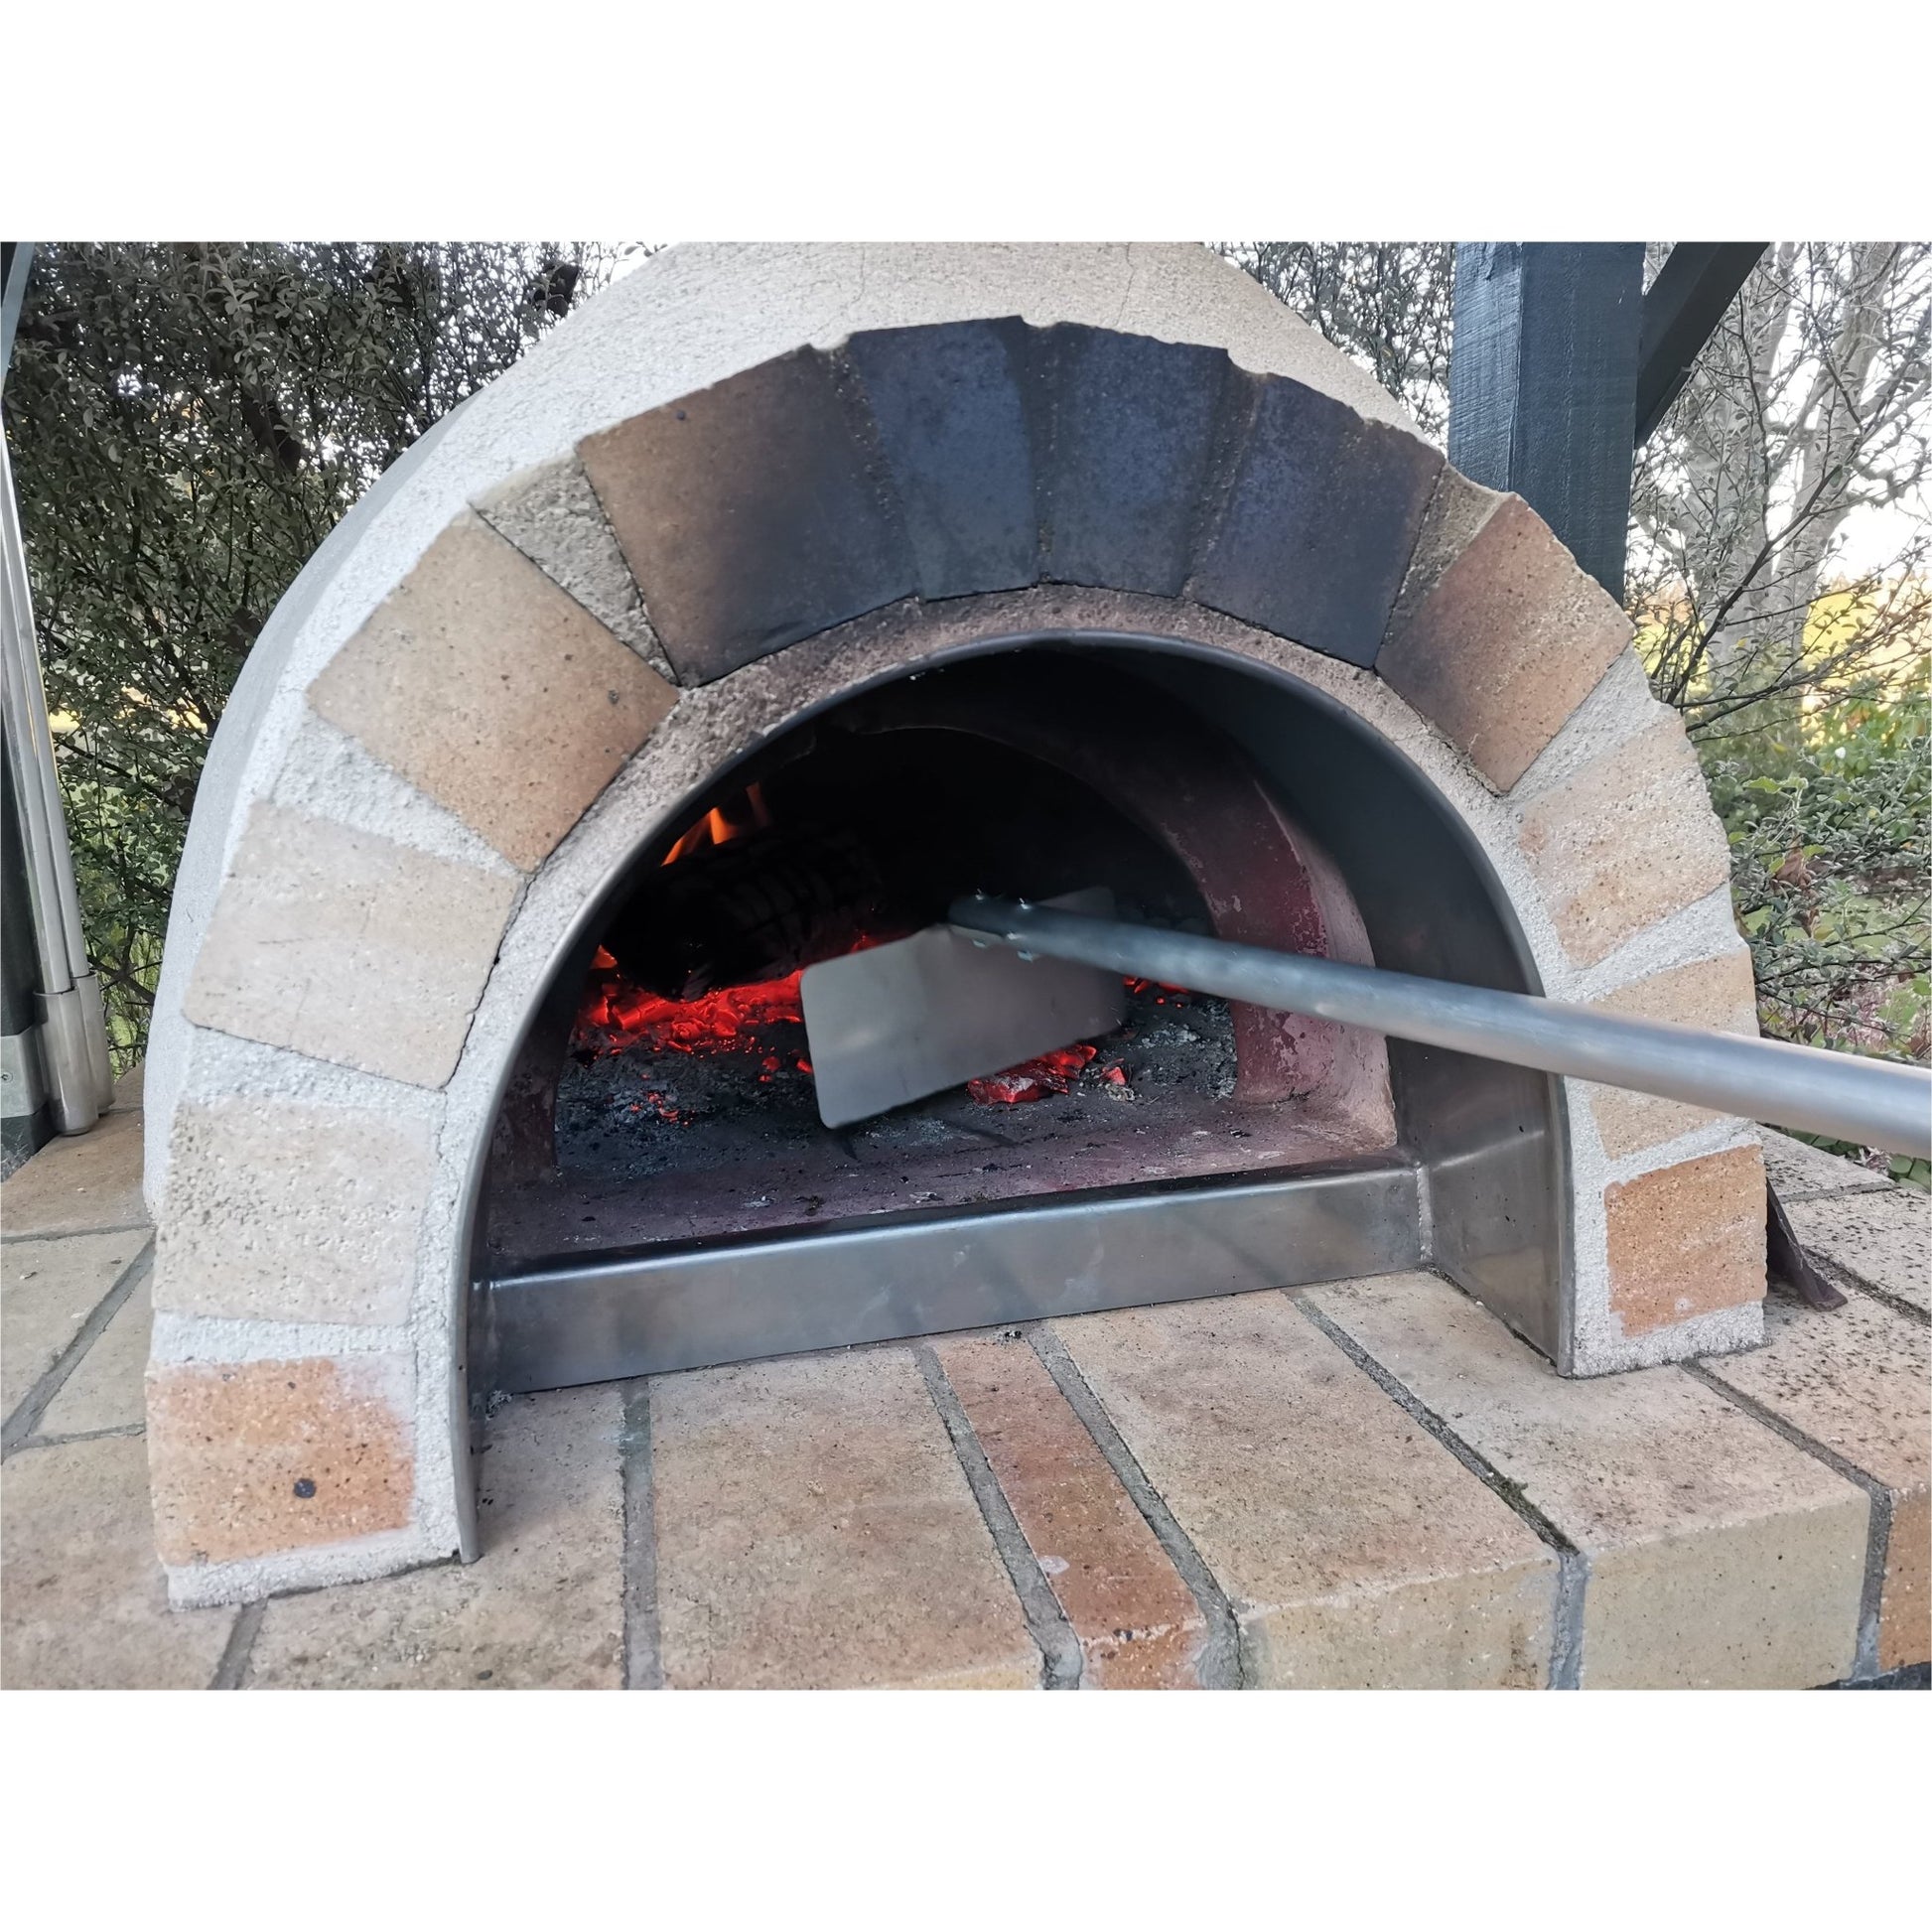 Coals Rake woodfired Pizza ovens - Pizza Oven Tools NZ